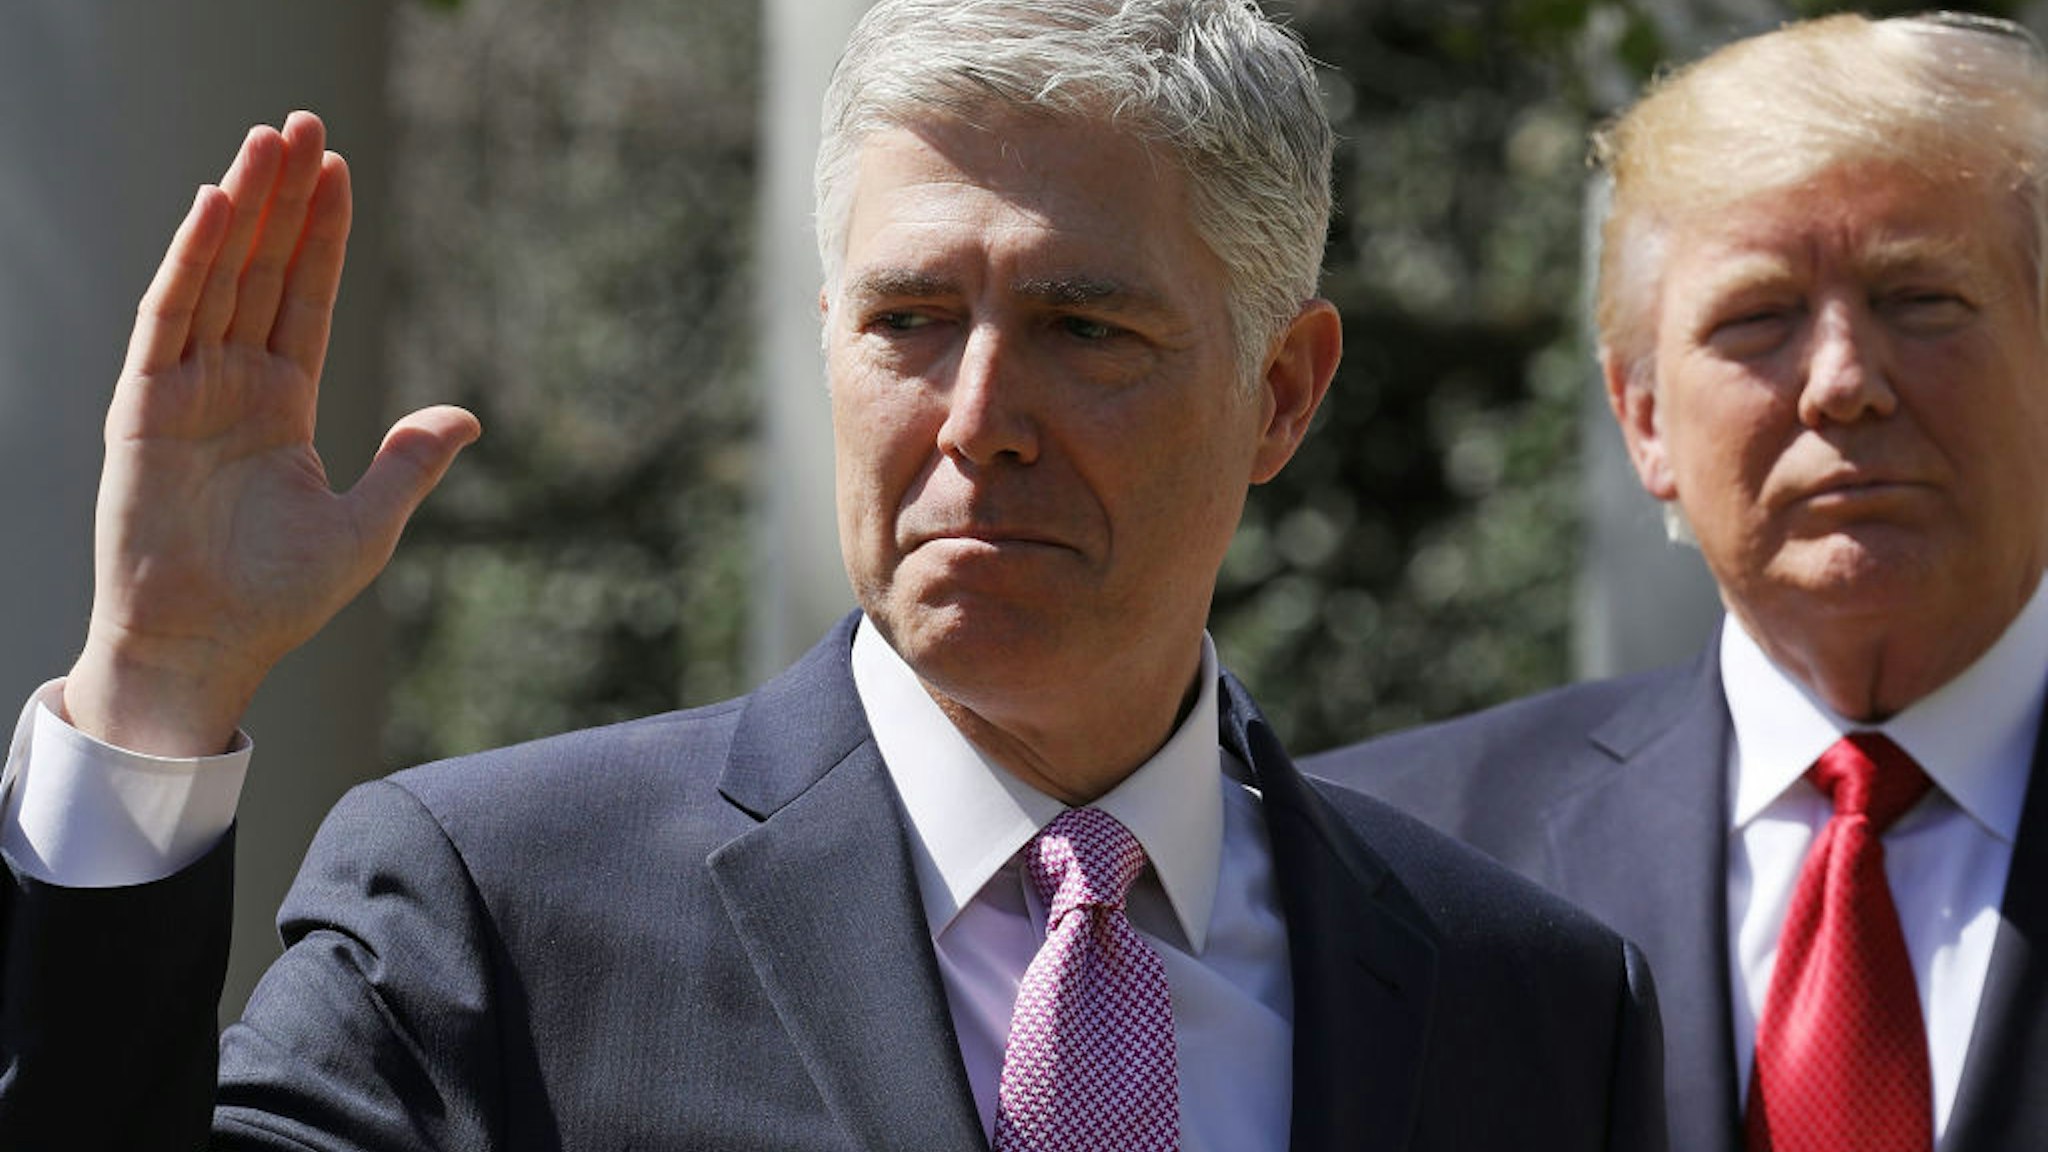 U.S. Supreme Court Associate Justice Judge Neil Gorsuch takes the judicial oath as President Donald Trump looks on during a ceremony in the Rose Garden at the White House April 10, 2017 in Washington, DC.